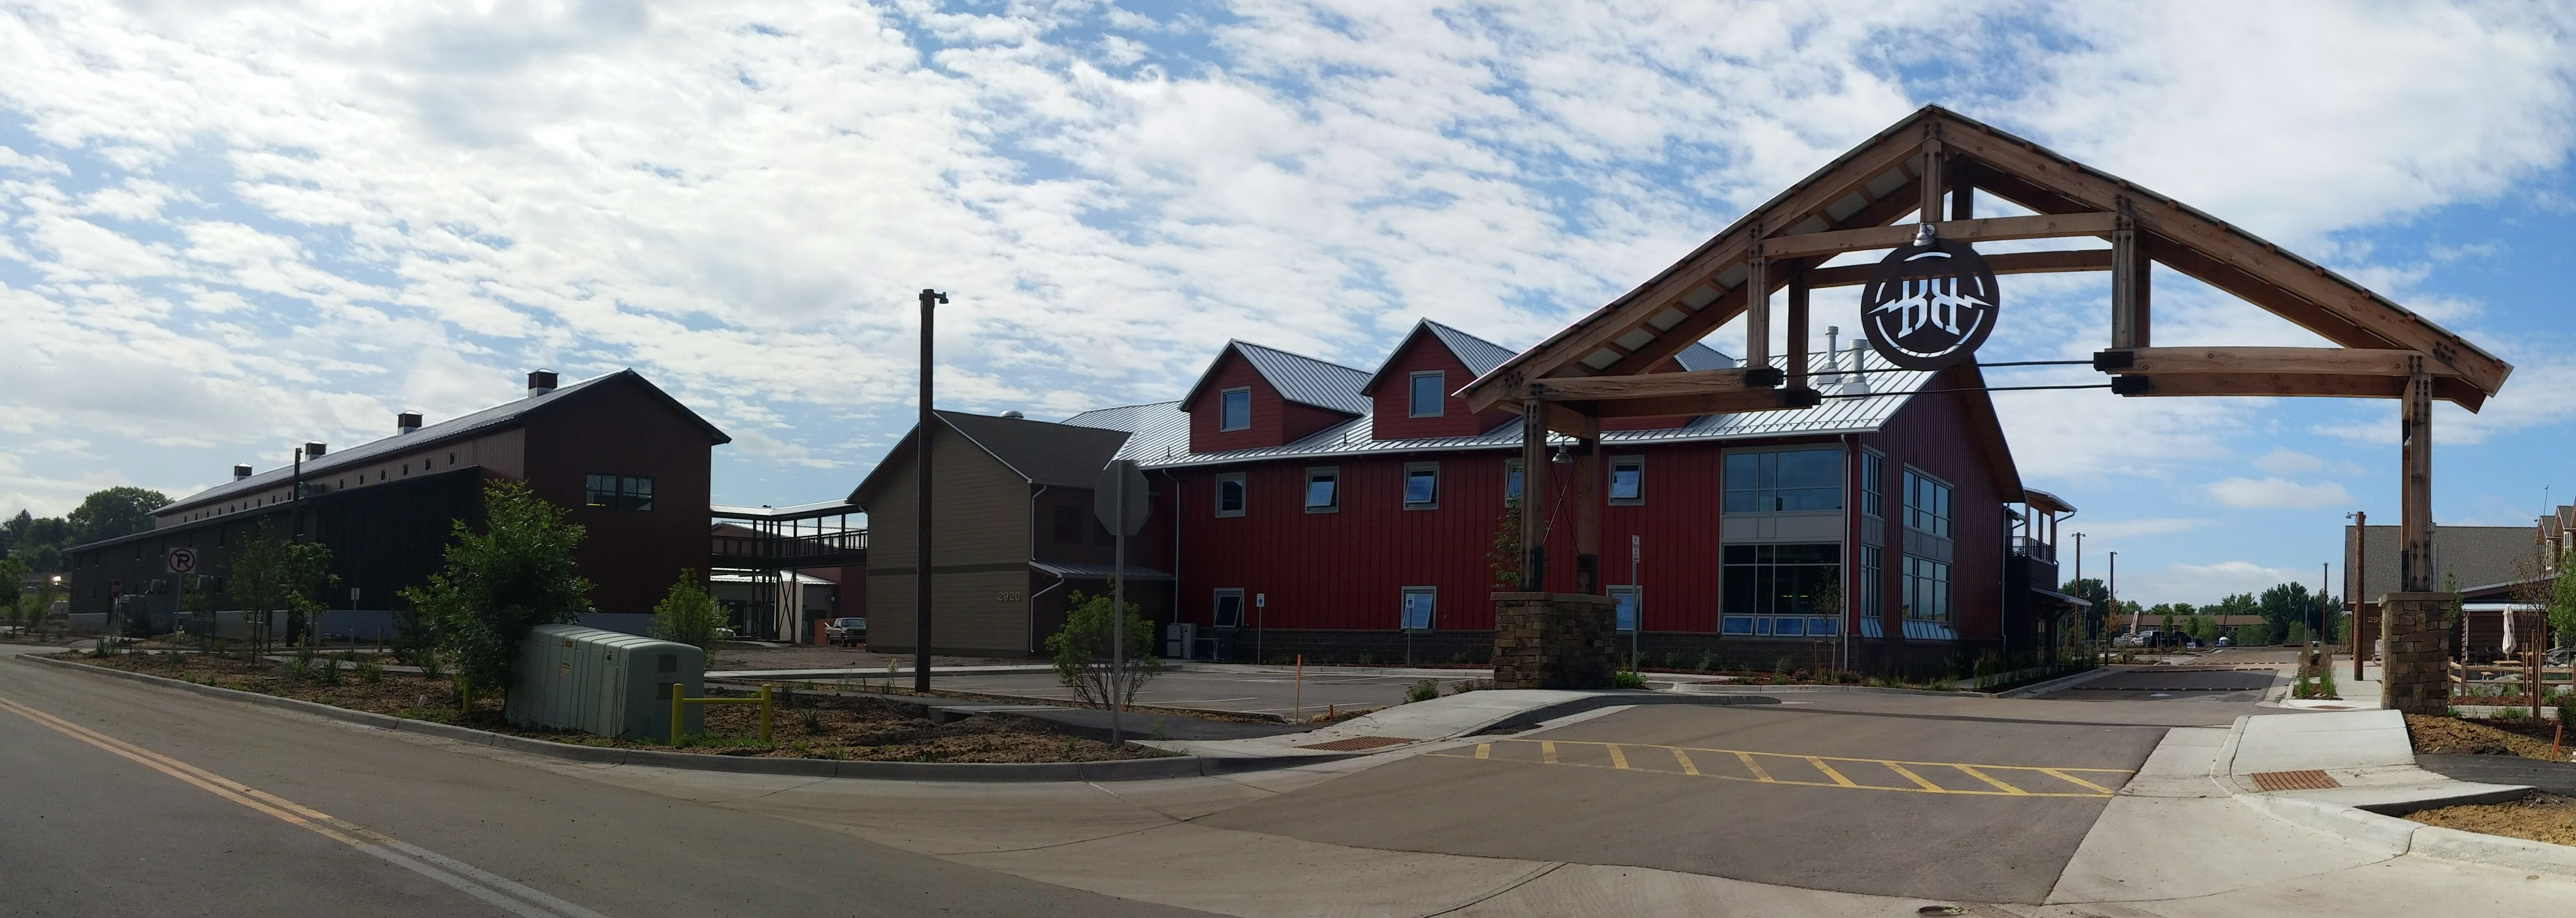 Sustainability on the New Breckenridge Brewery Campus